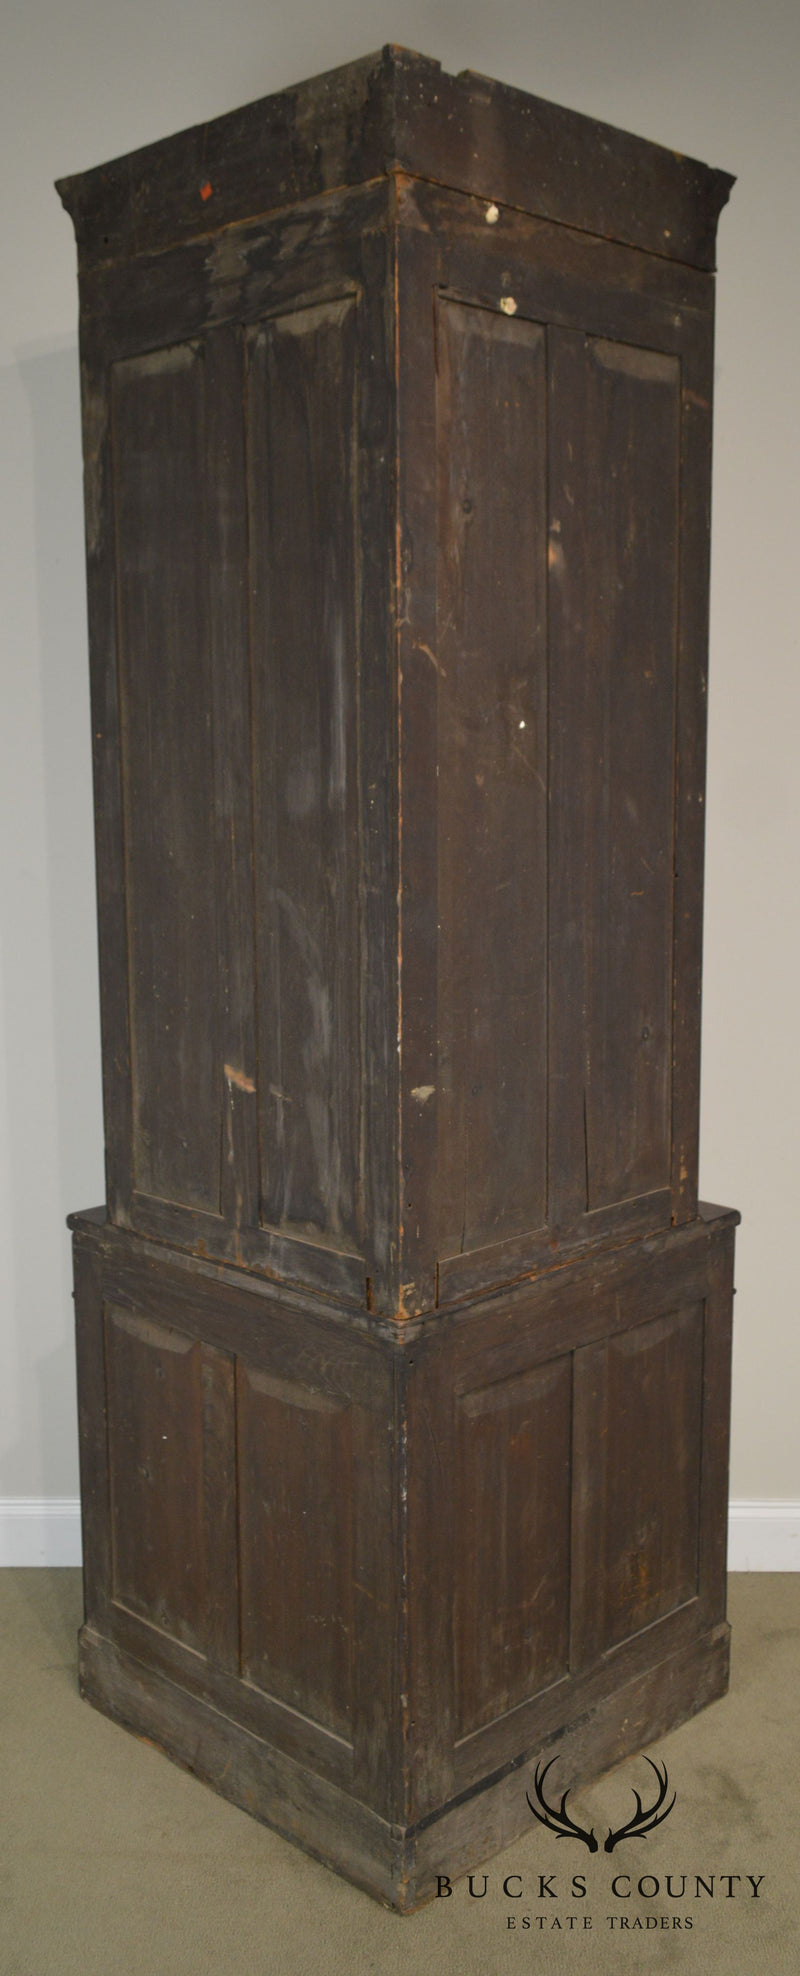 American Gothic Antique Rosewood Corner Cabinet Attributed to Meeks